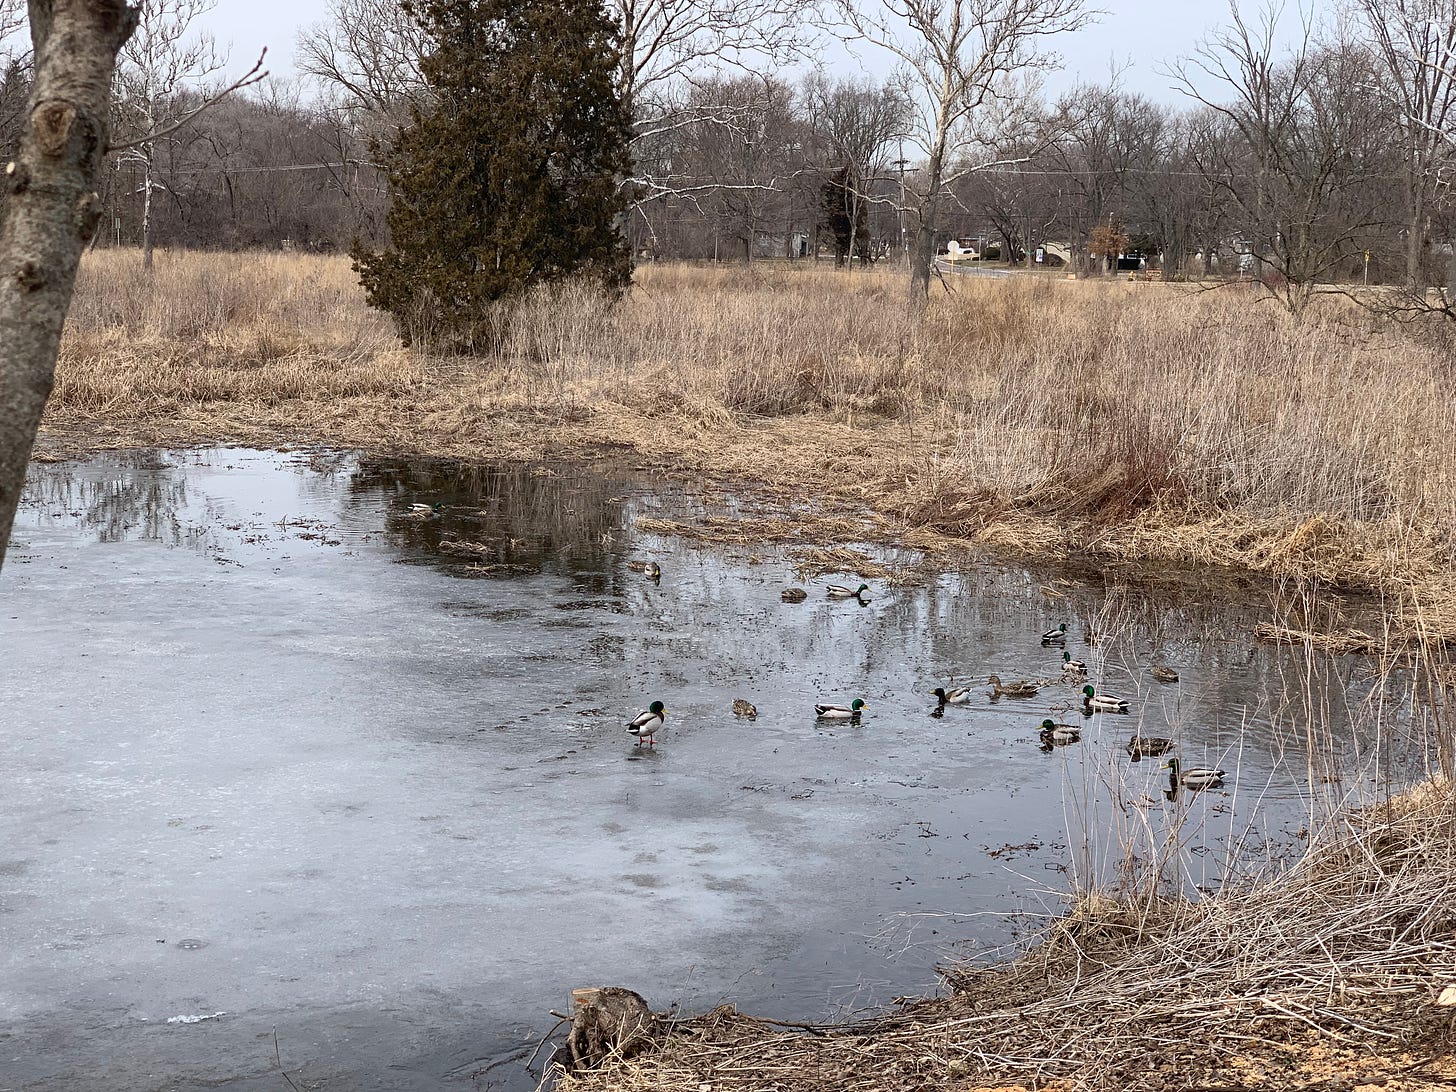 A half frozen pond with a number of ducks swimming on the edge where the ice has melted.